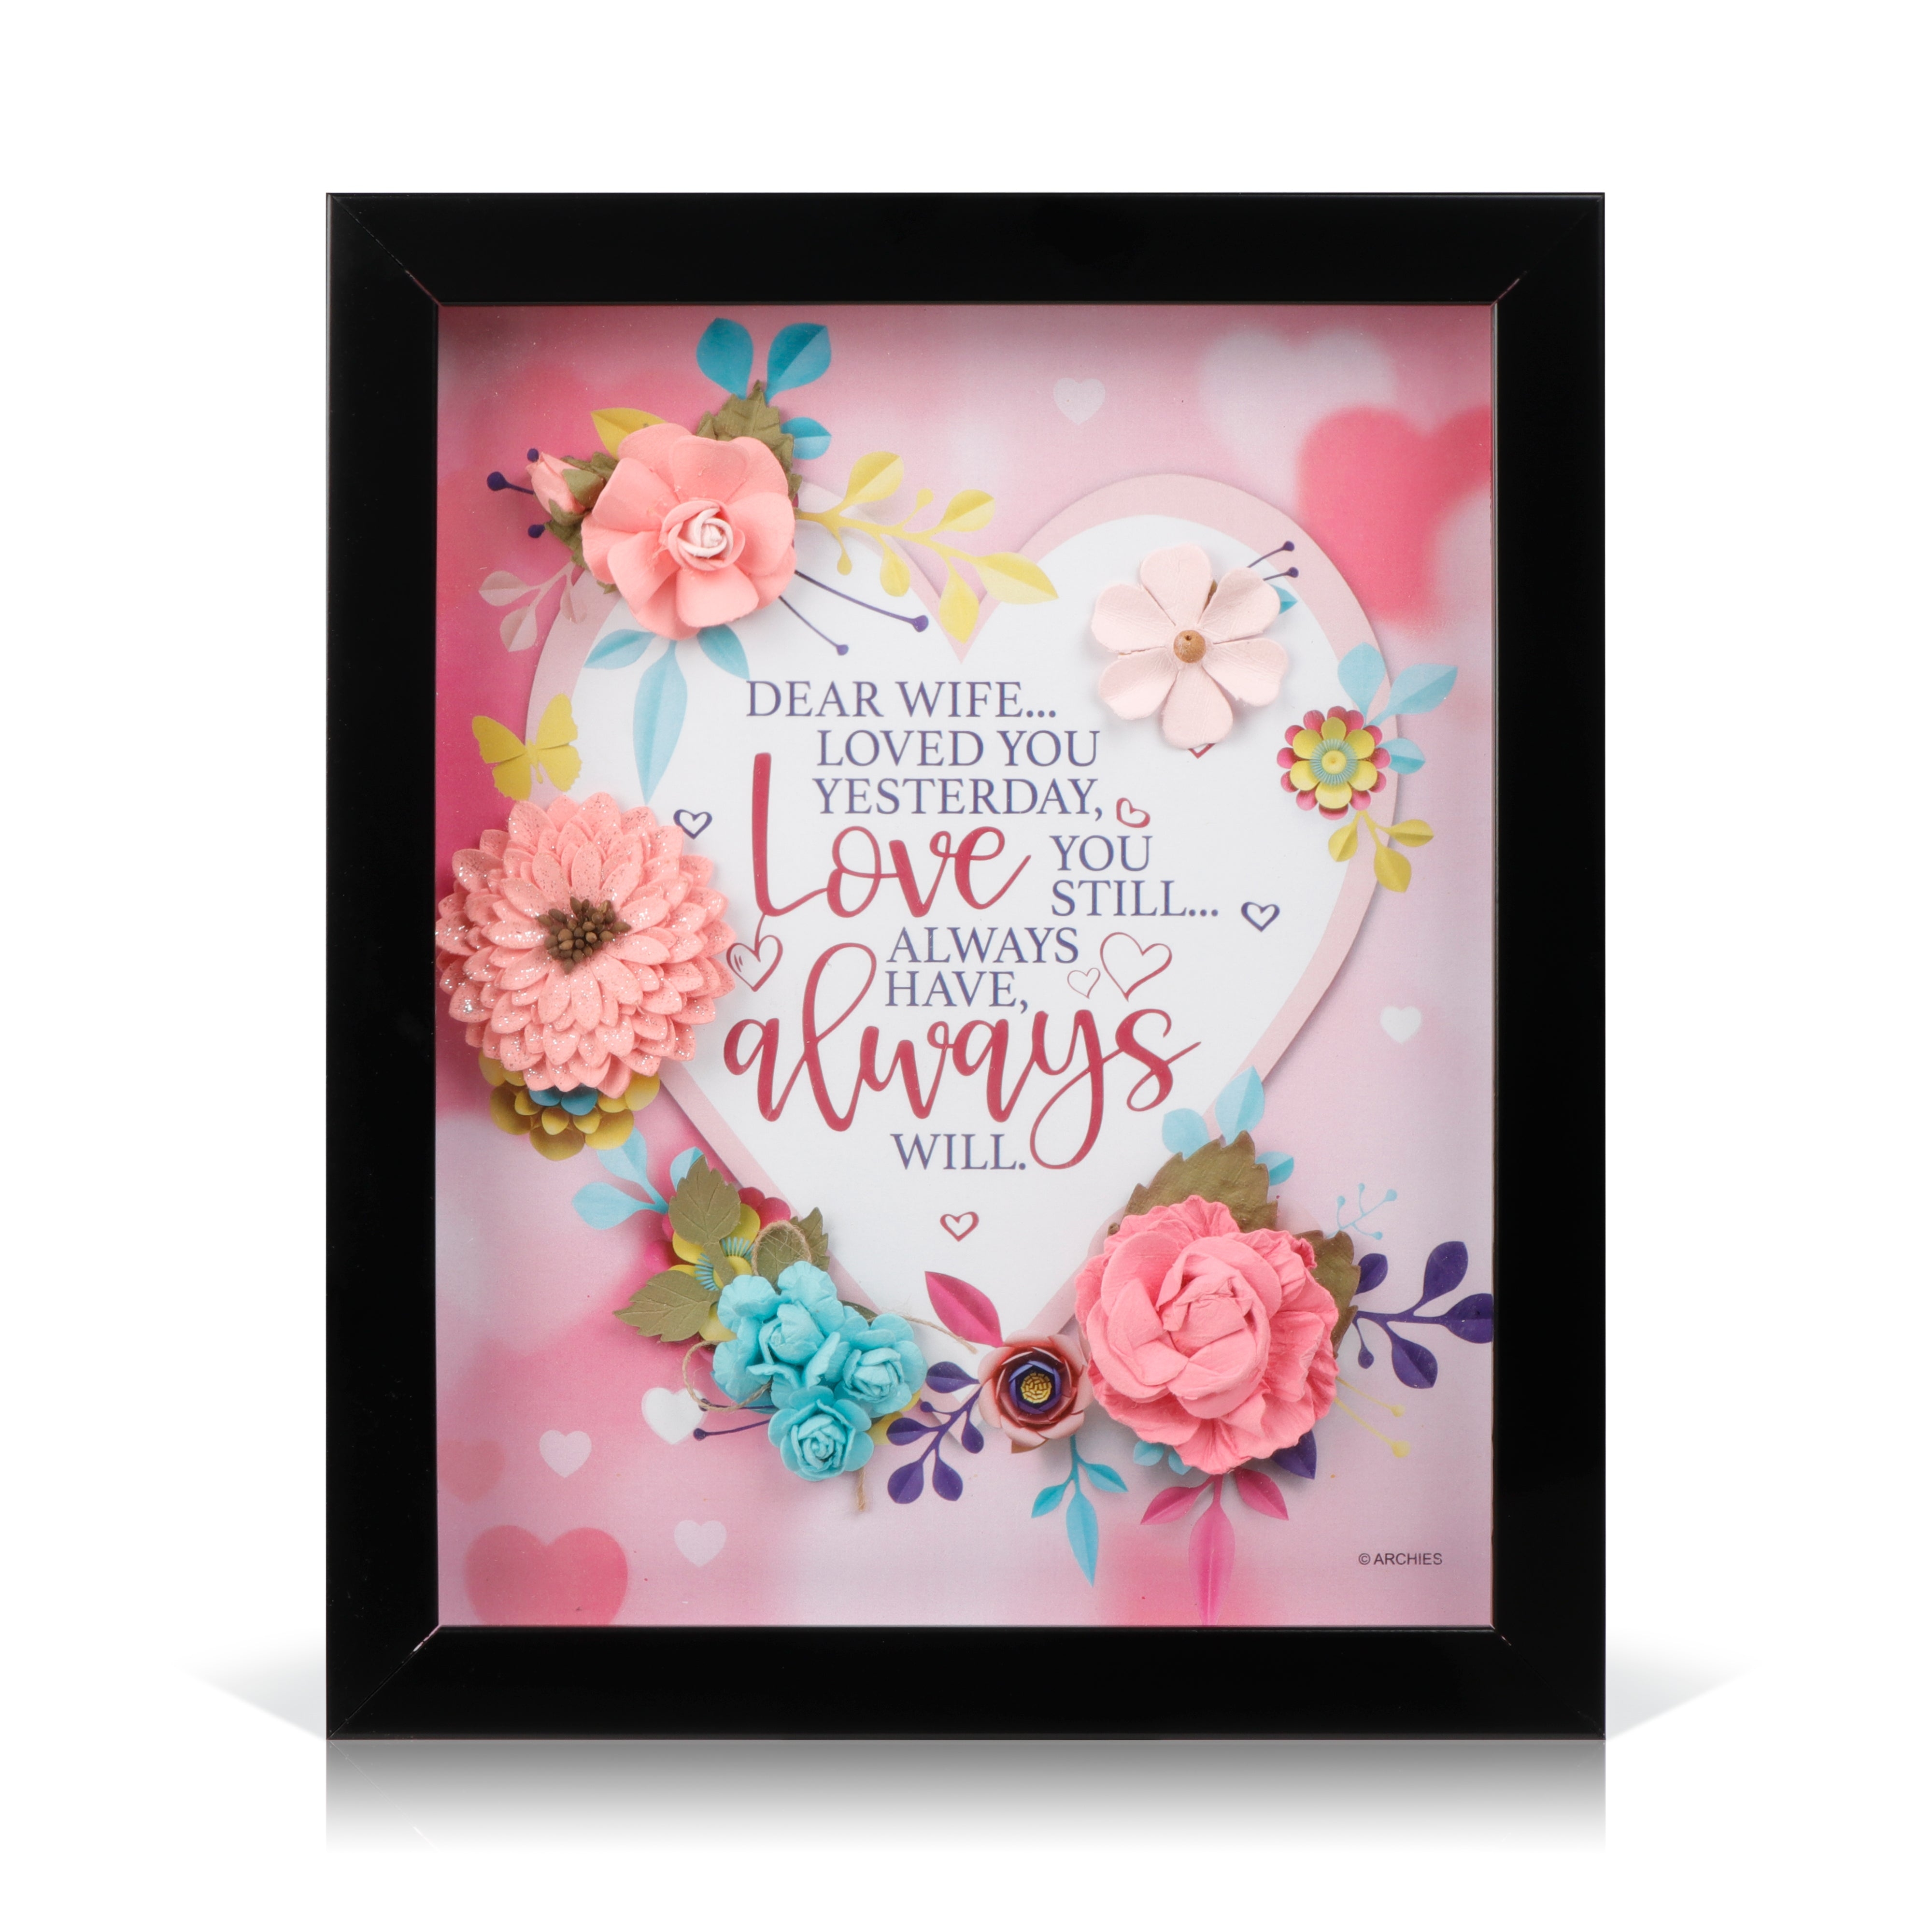 Archies KEEPSAKE QUOTATION - DEAR WIFE LOVED ..... For gifting and Home décor